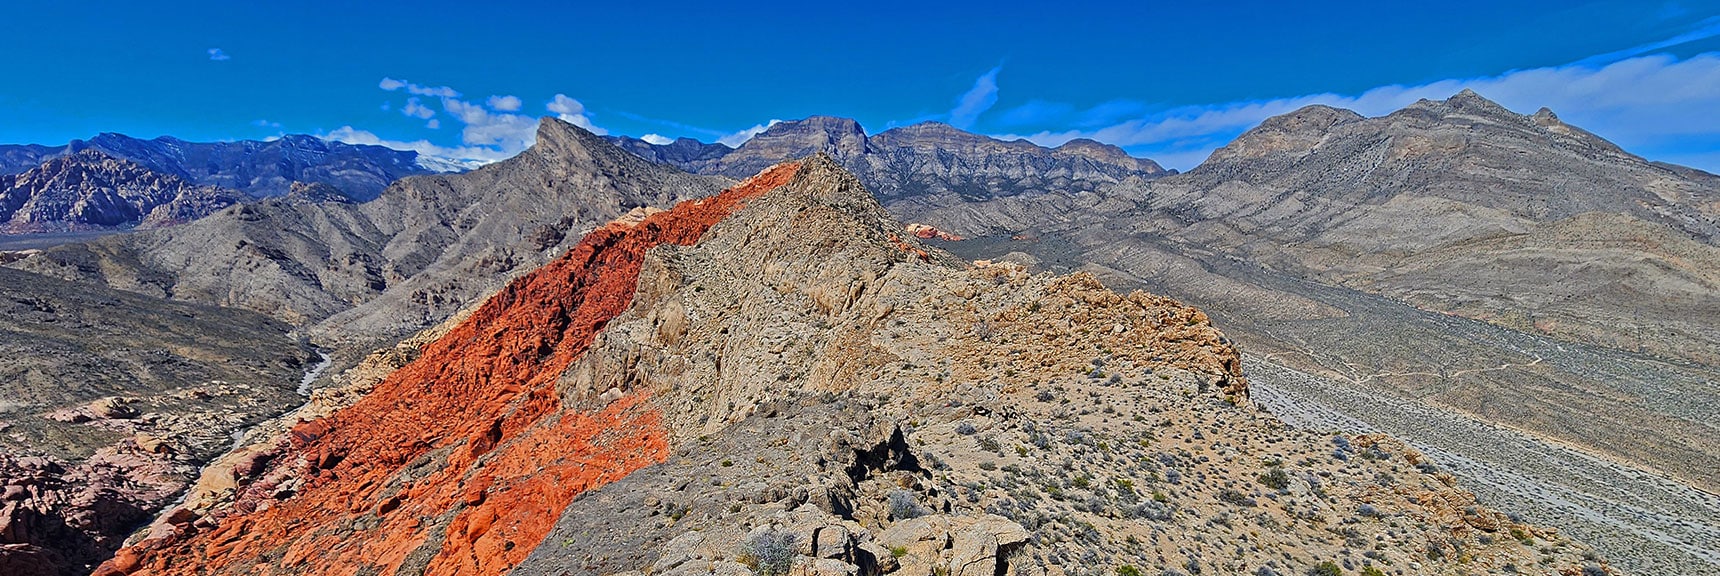 Witness Spectacular Views of Calico Basin, Brownstone Basin and Beyond | Gray Cap Ridge / Brownstone Basin Loop | La Madre Mountains Wilderness, Nevada